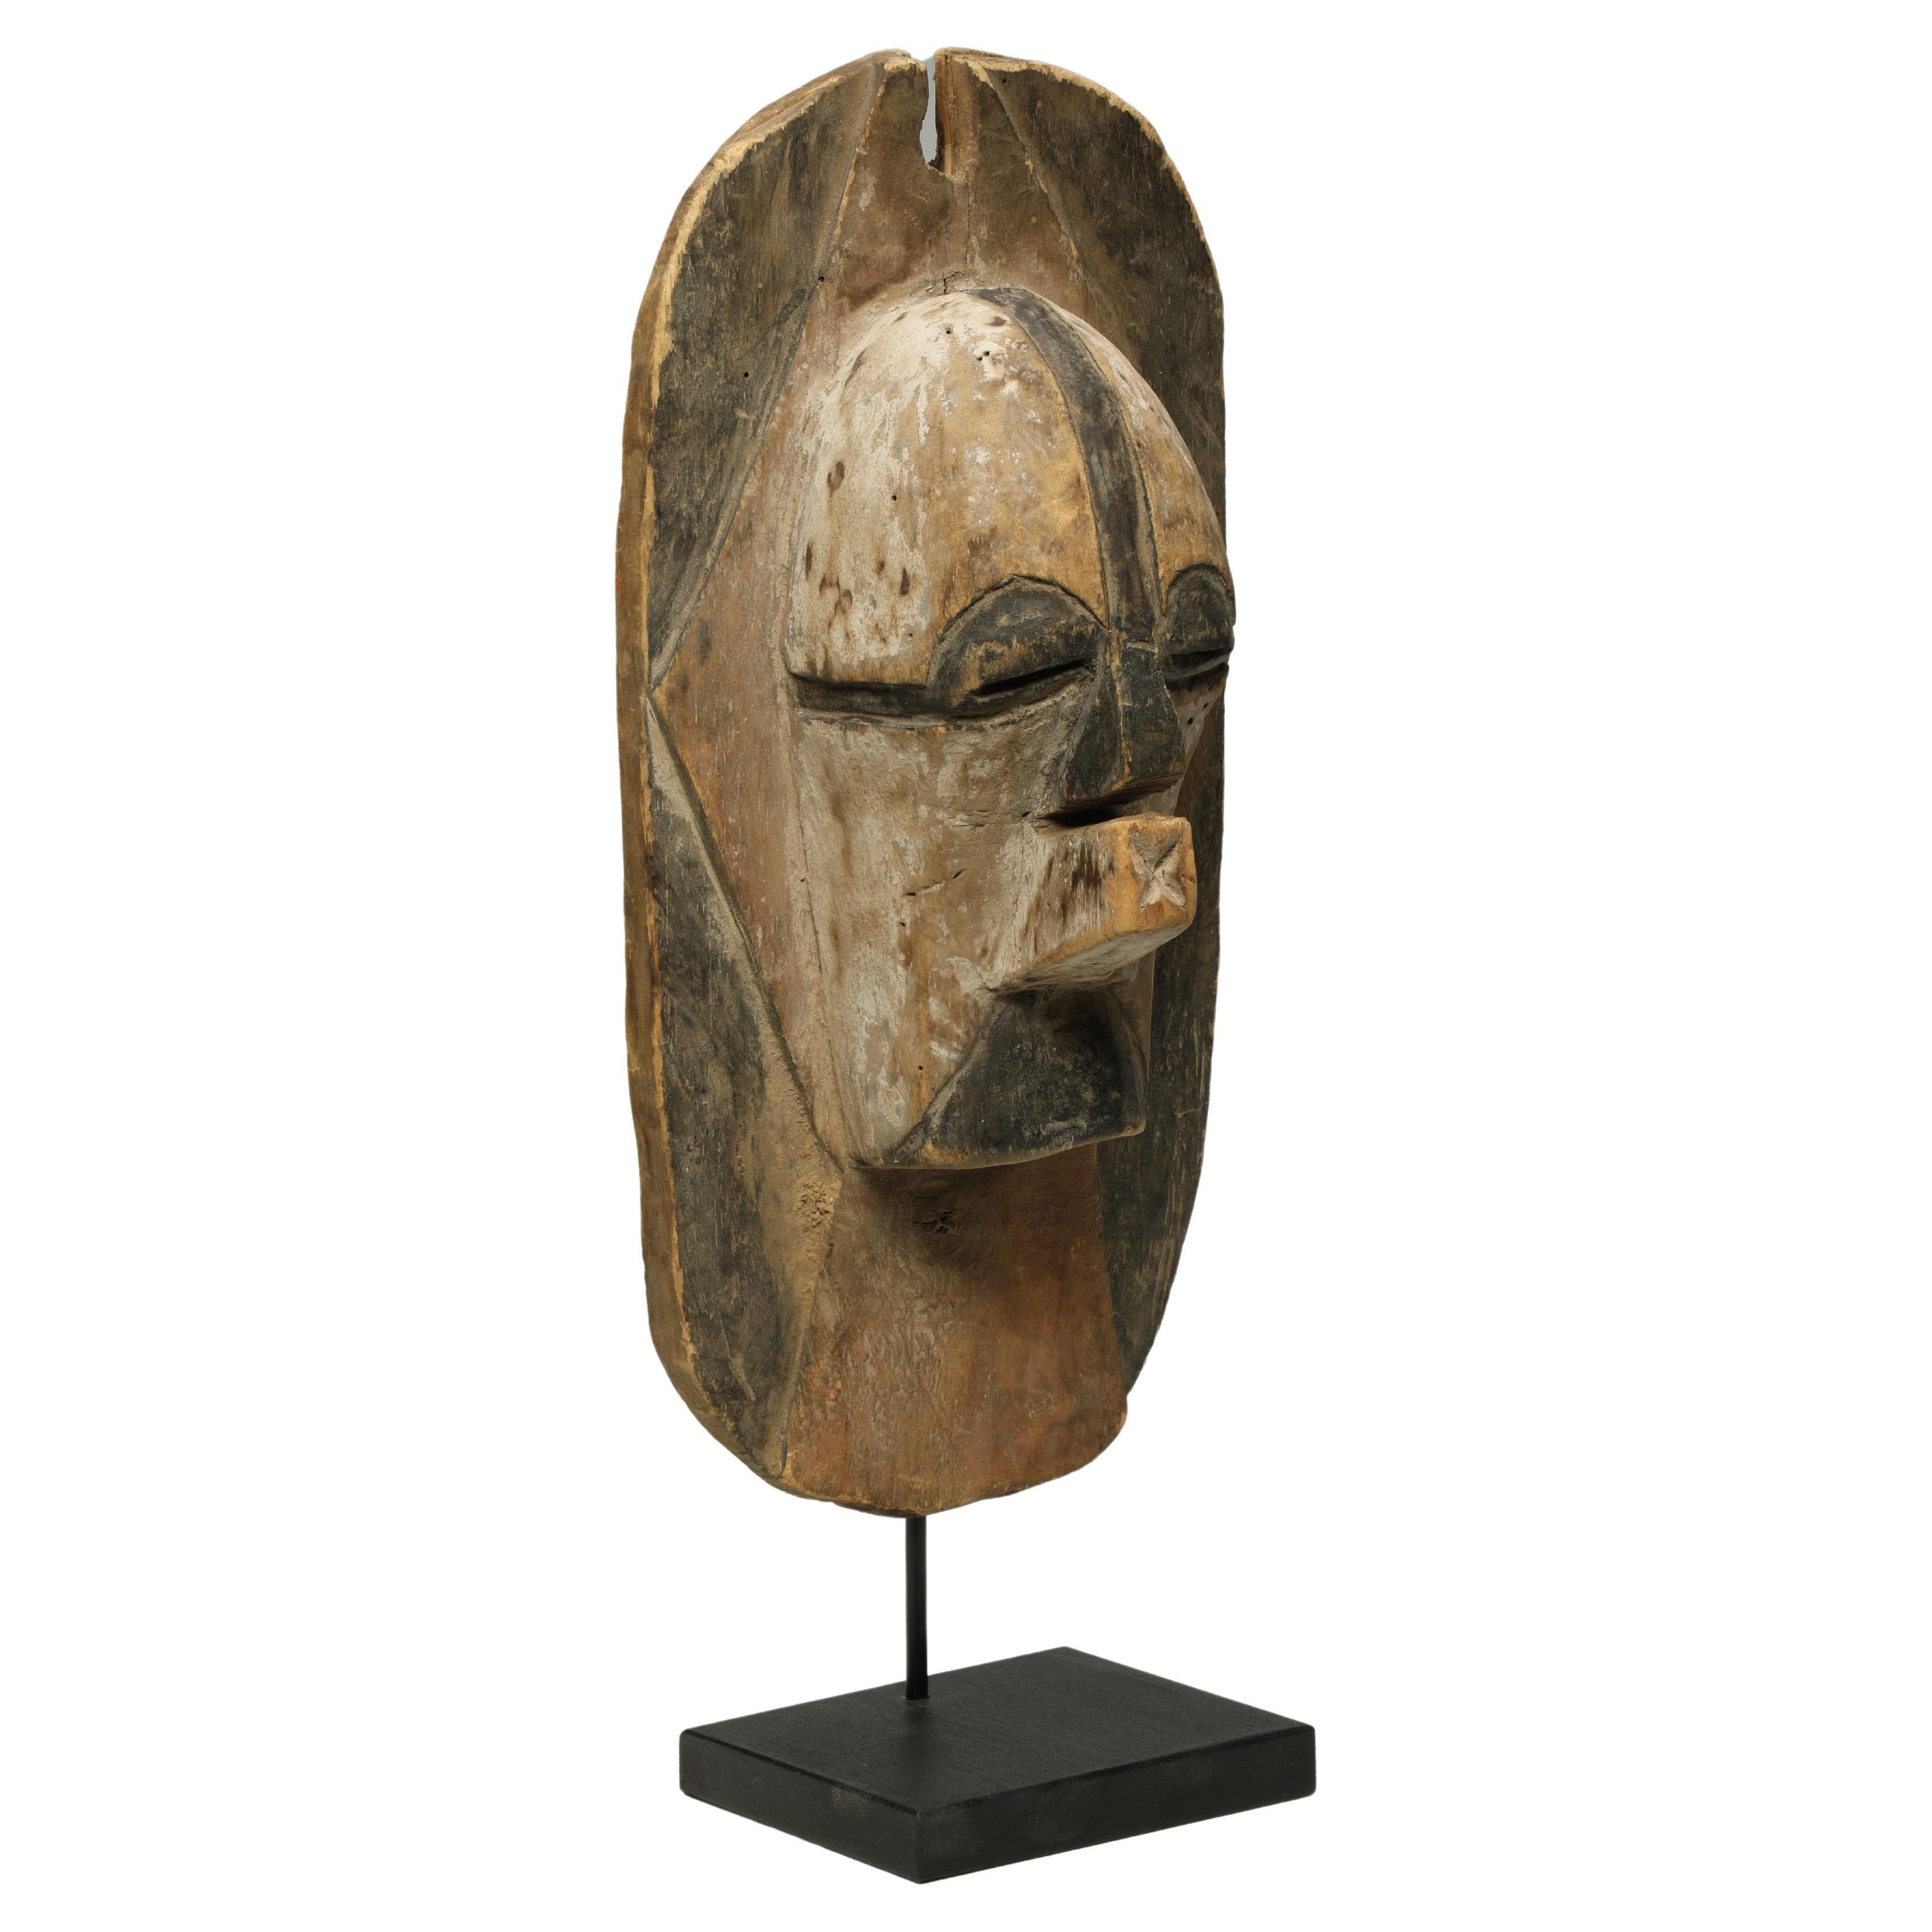 Songye or luba kifwebe wood mask or shield, designed to be hung on the wall, with traces of white, red and black pigments. Africa, Congo

This mid-20th Century mask shows great design, color and character from age and use. Projecting nose and mouth